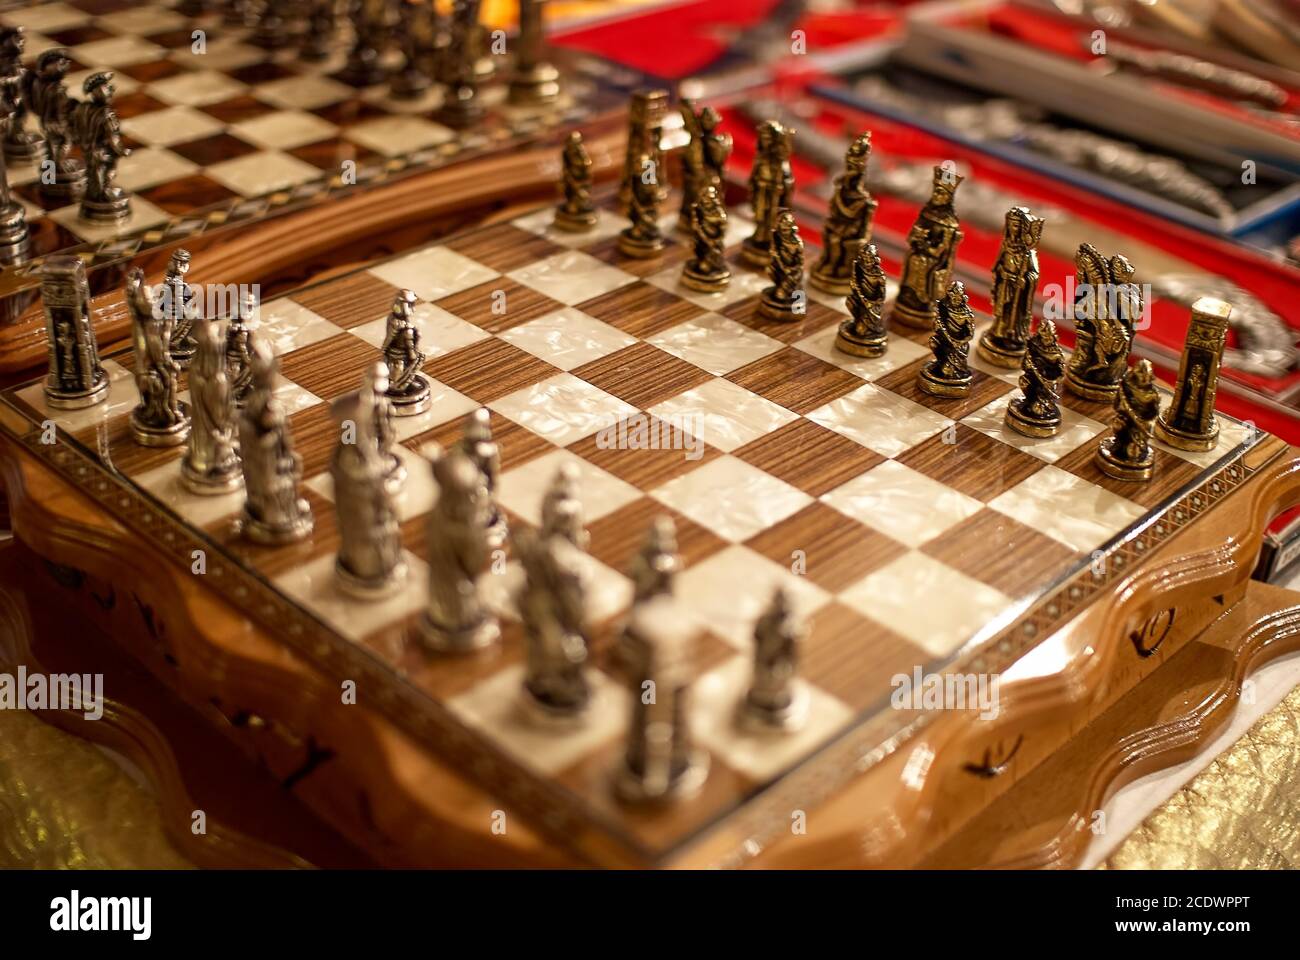 Beautiful chess set for sale on Grand Bazaar, Turkey. Made of wood and metallic materials. Chessboard, classic game, strategic, strategy, turkish Stock Photo